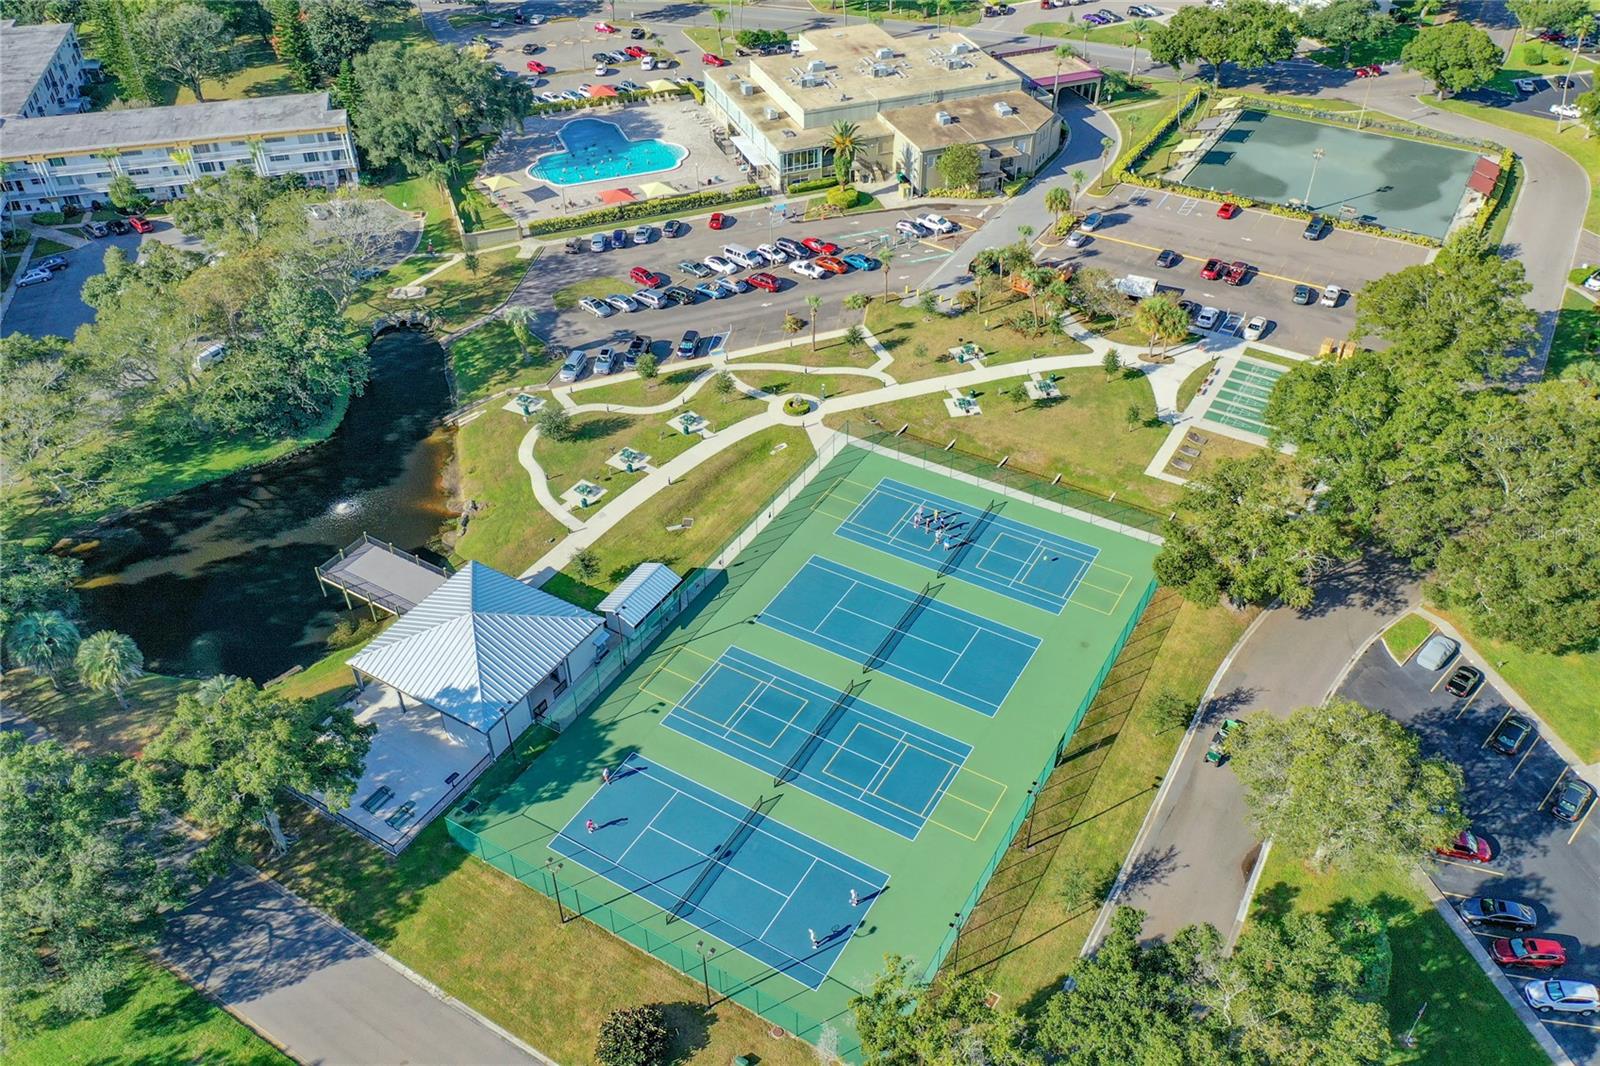 Recreation facilities - tennis and pickleball courts - pool - shuffle board - horseshoes - lawn bowling